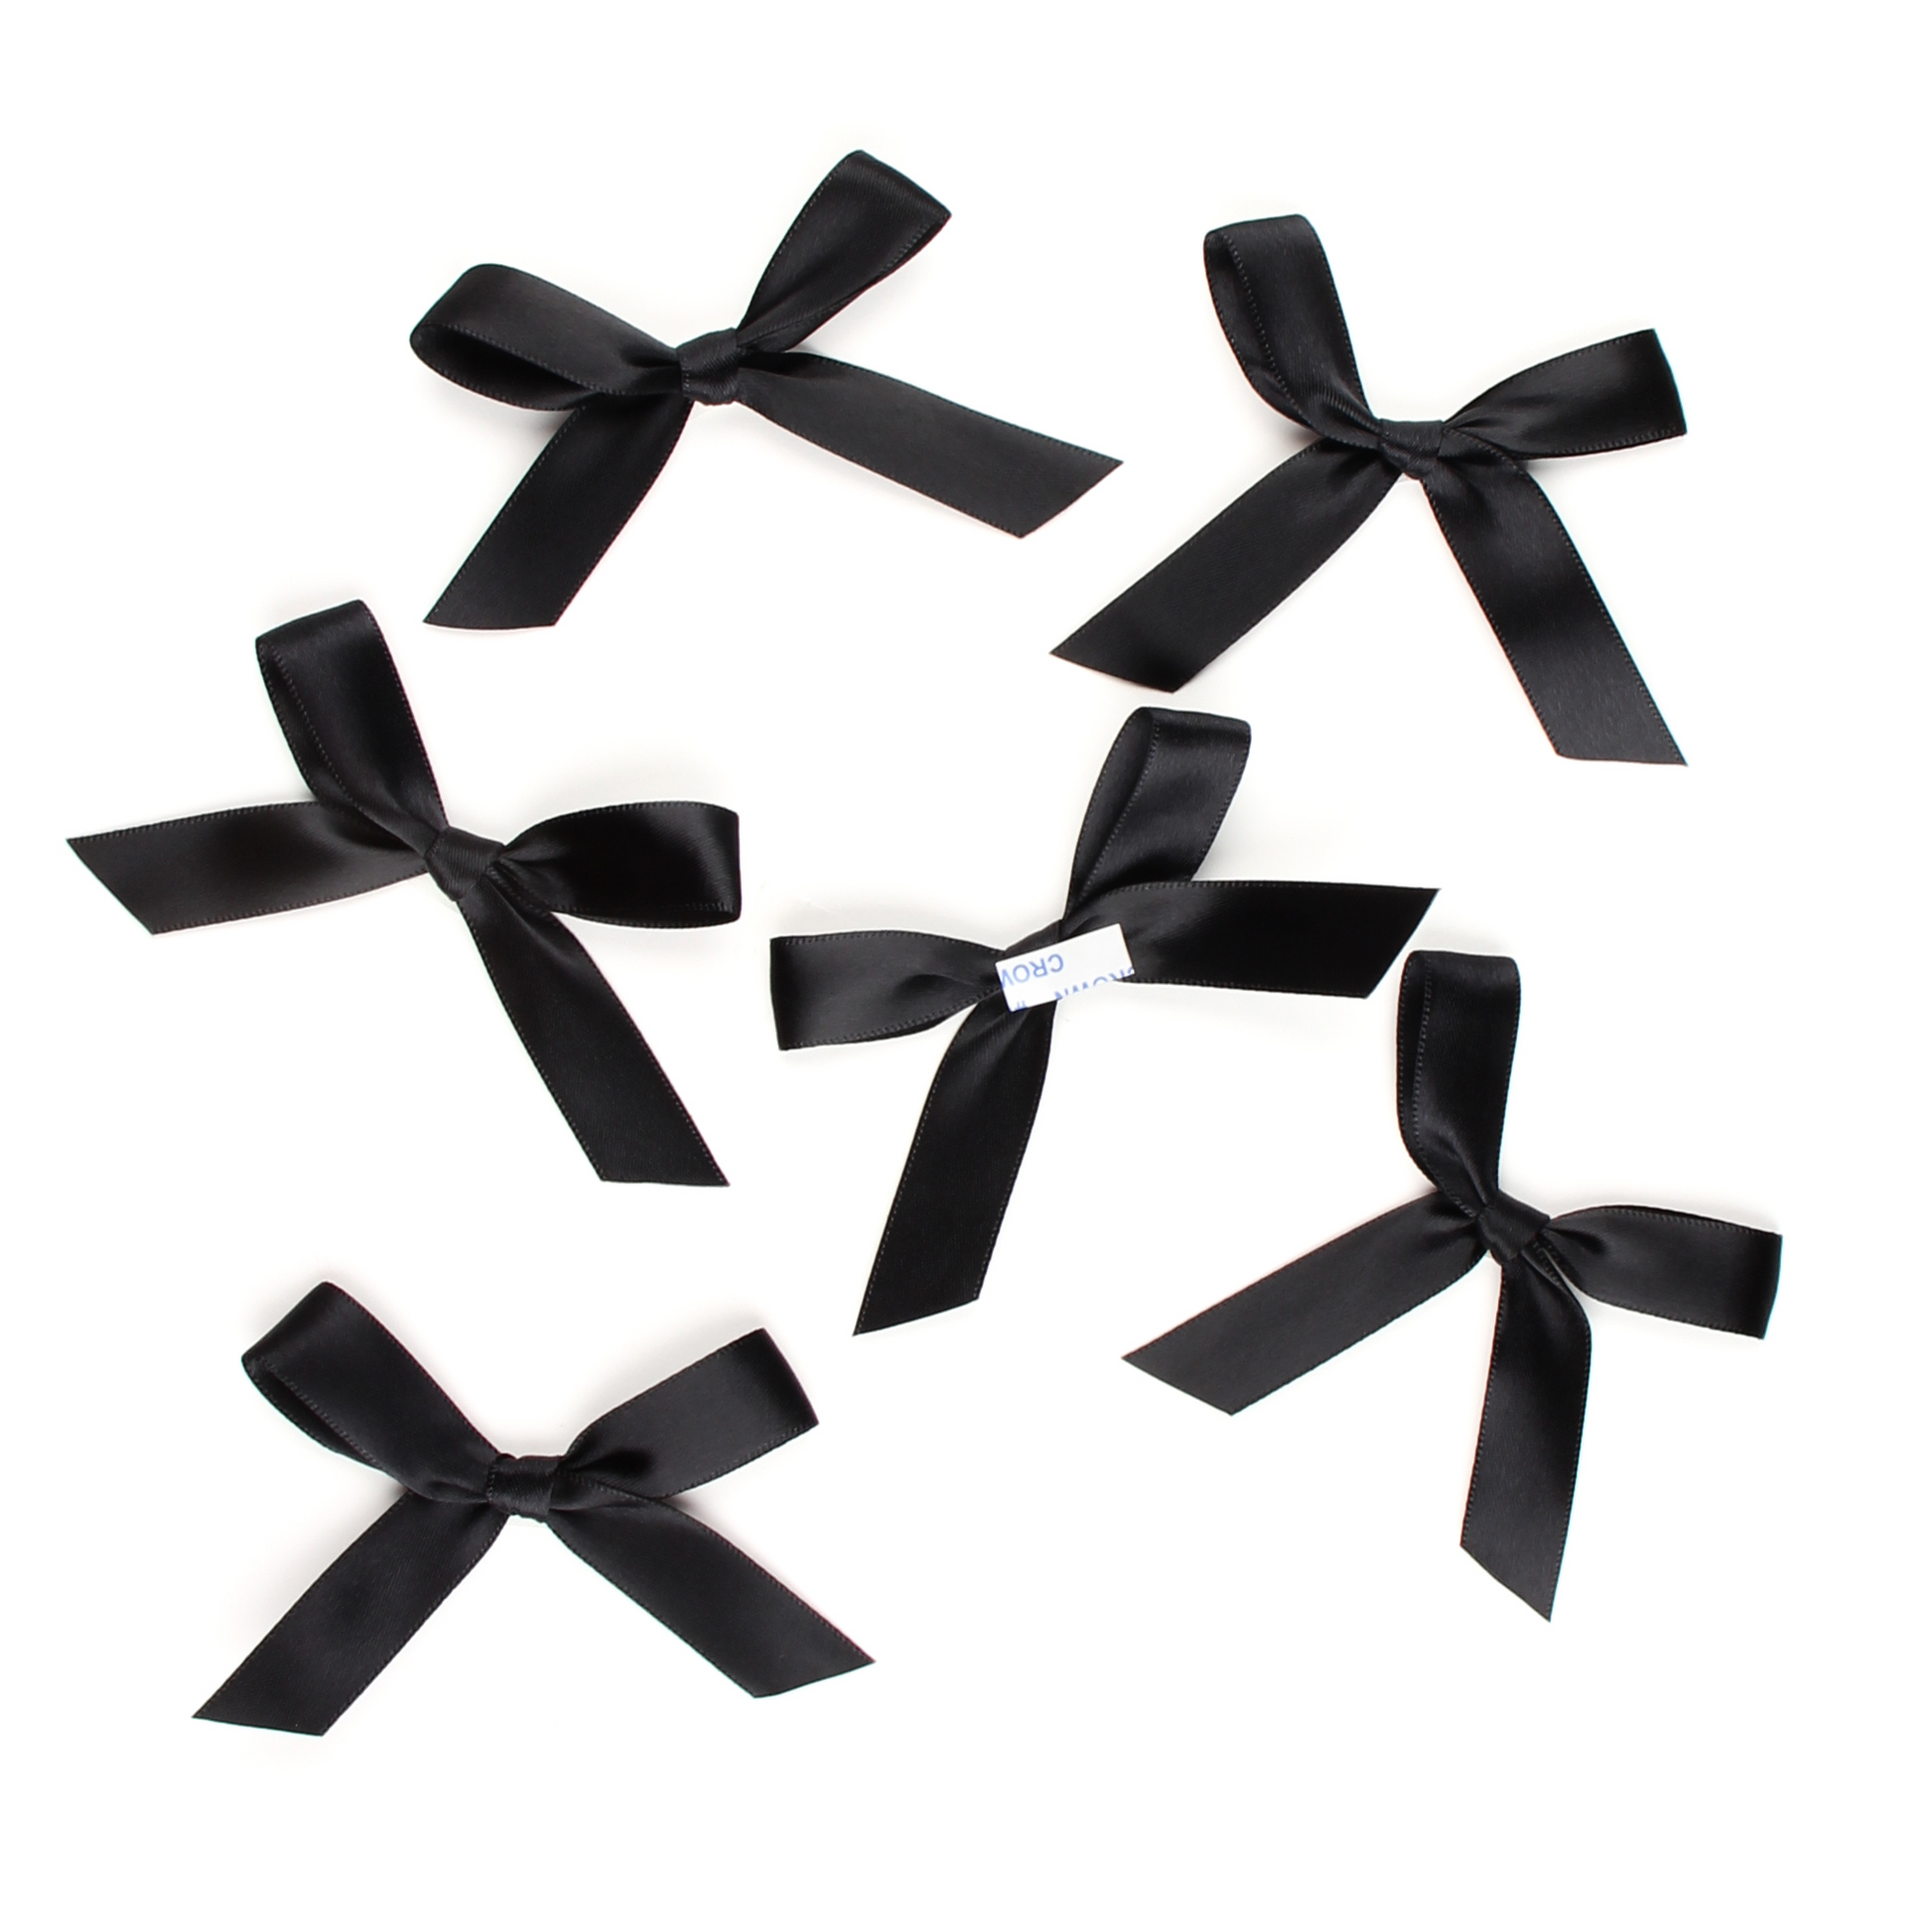 Multiple black satin pre-tied bows by Lux Party, showing peel and stick backing.